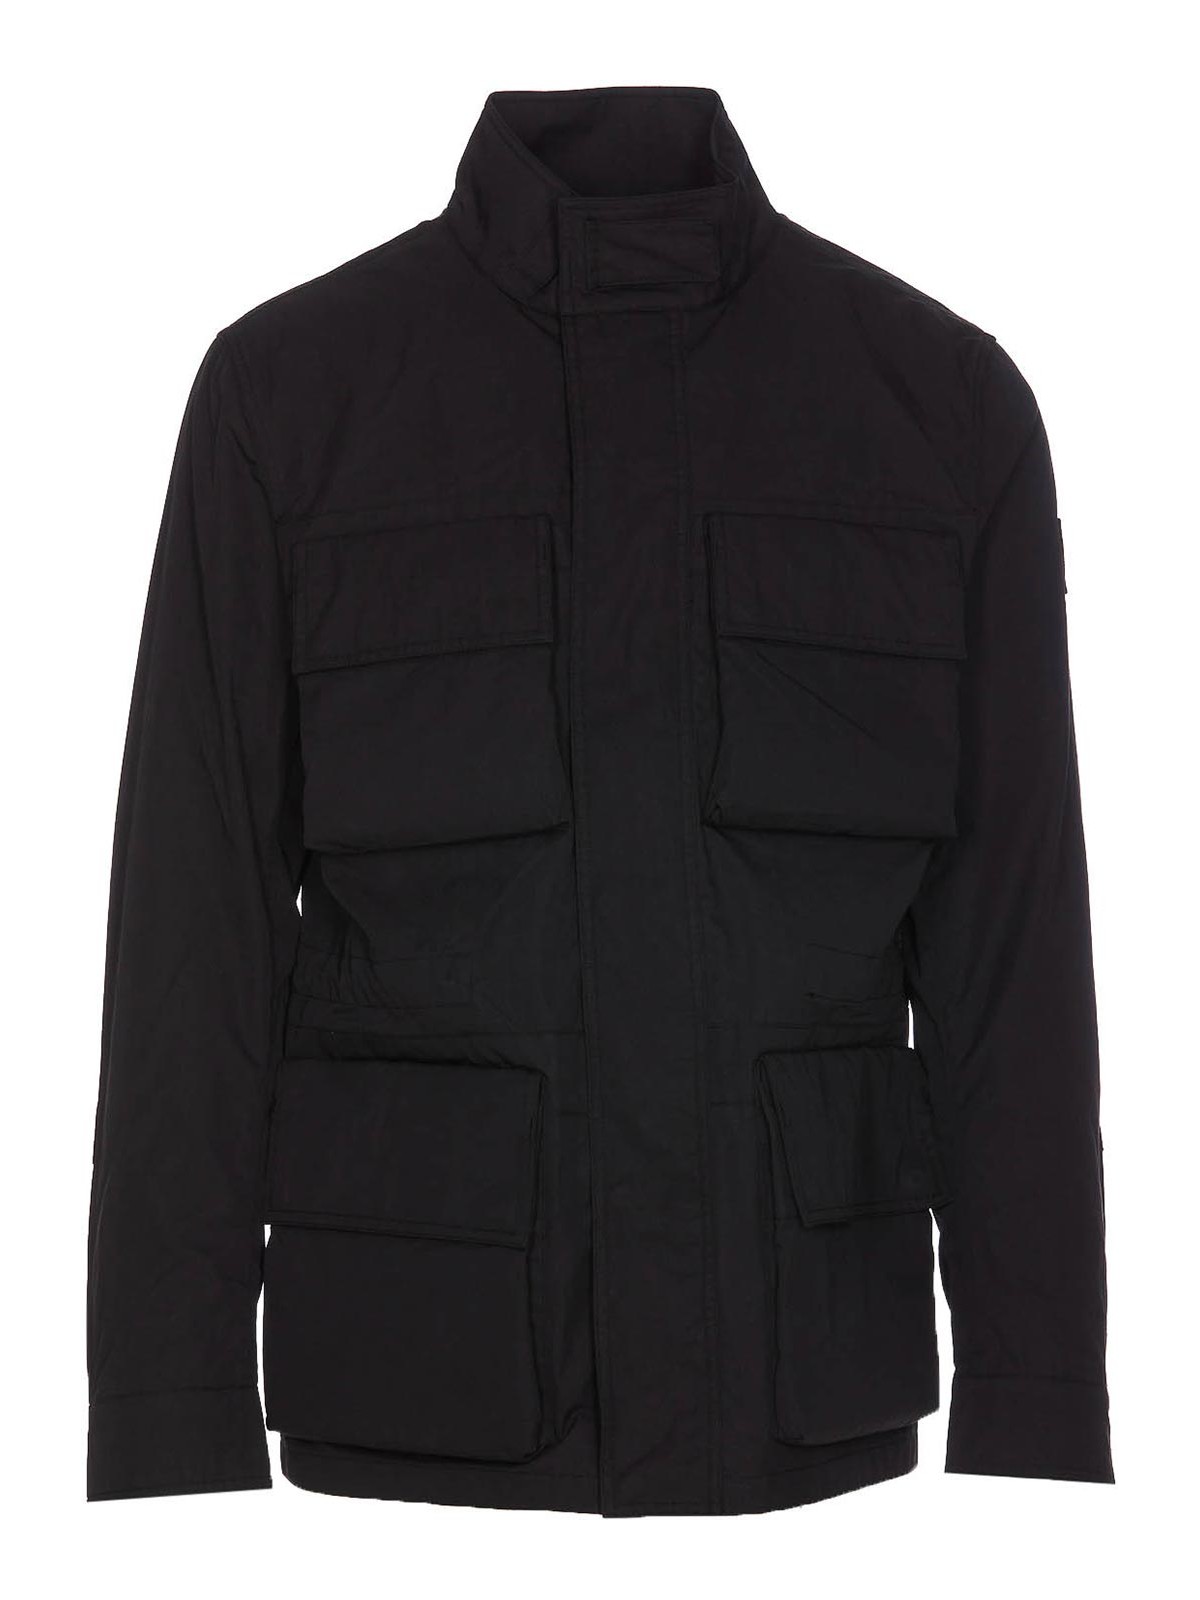 Belstaff Black Sprint Jacket With Zip And Buttons